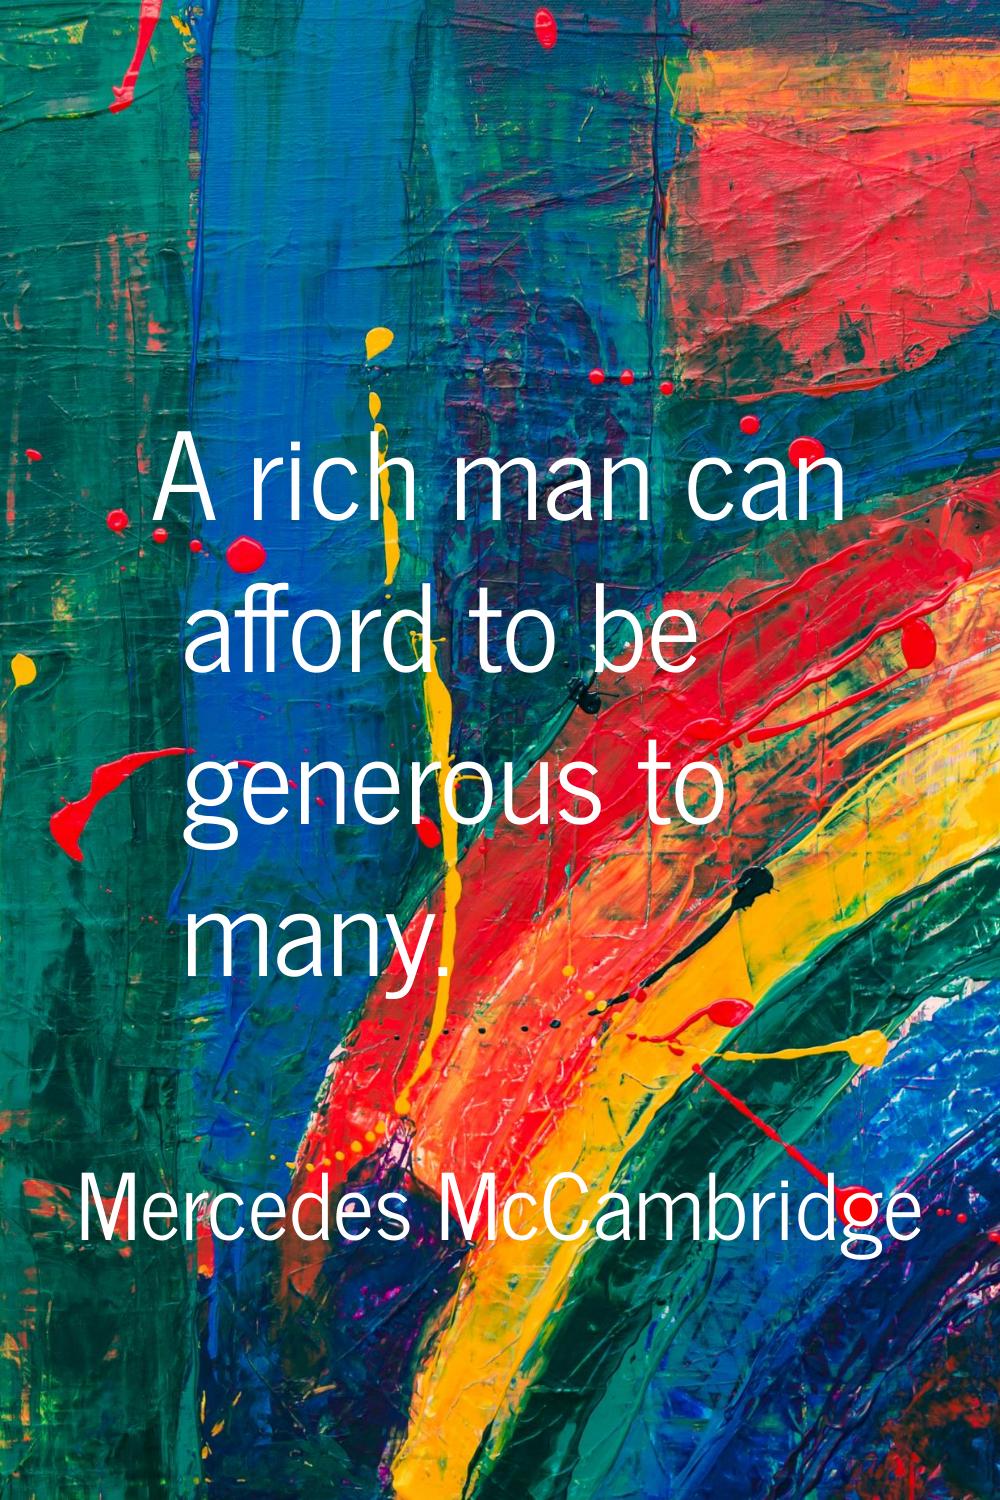 A rich man can afford to be generous to many.